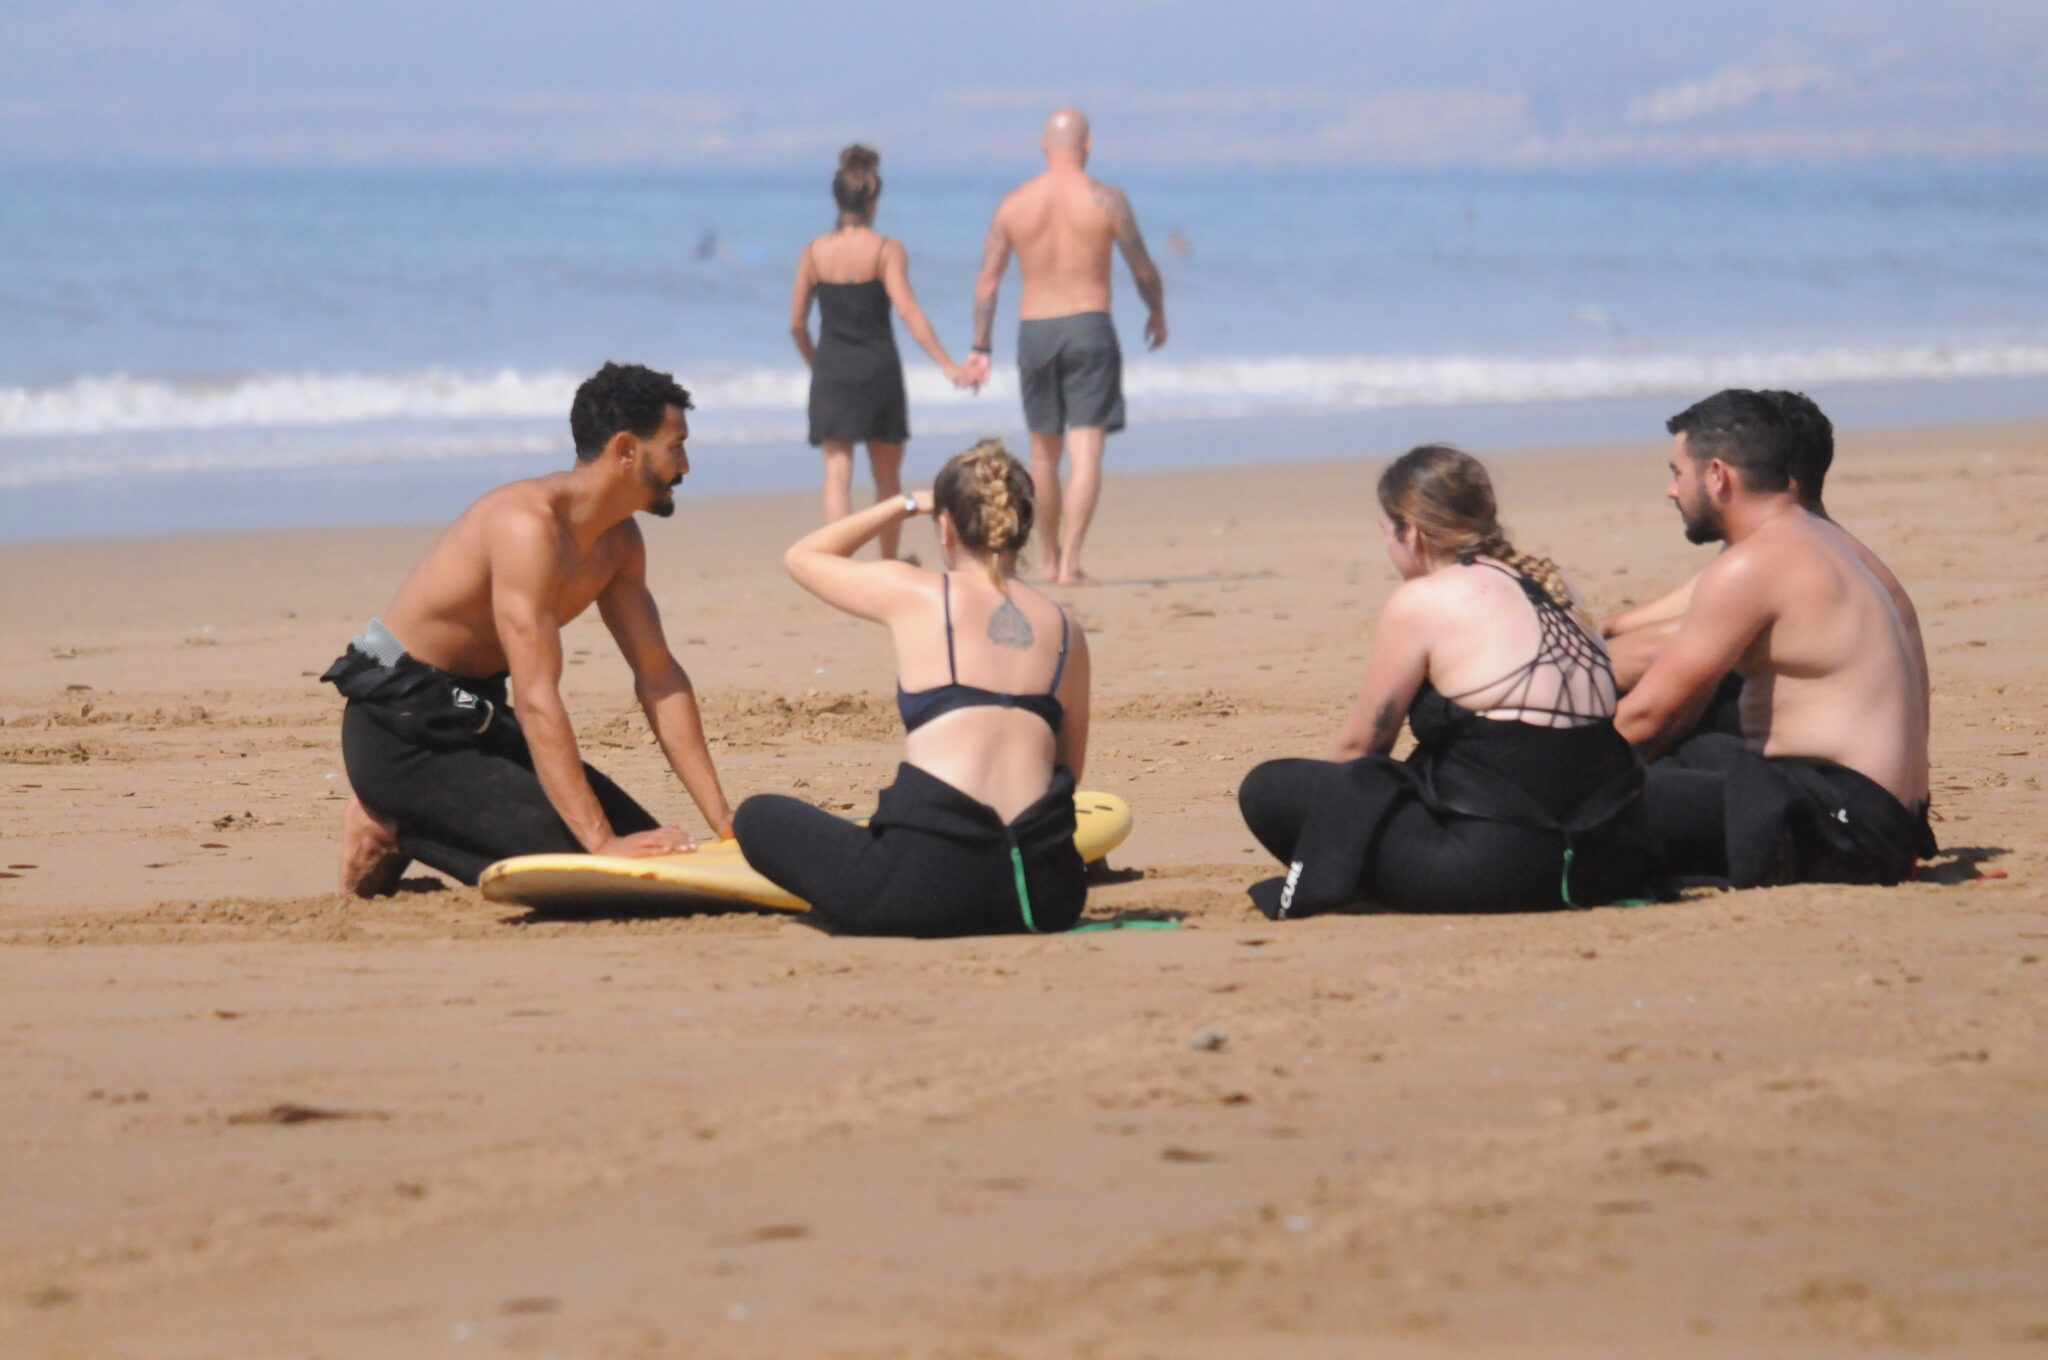 The Surf Lessons package is for anyone from full beginners to intermediate surfers. The surf instructor will teach how to take-off and ride waves, from white wash “foamies” to green waves. You will also learn how to read the spots and place yourself accordingly.